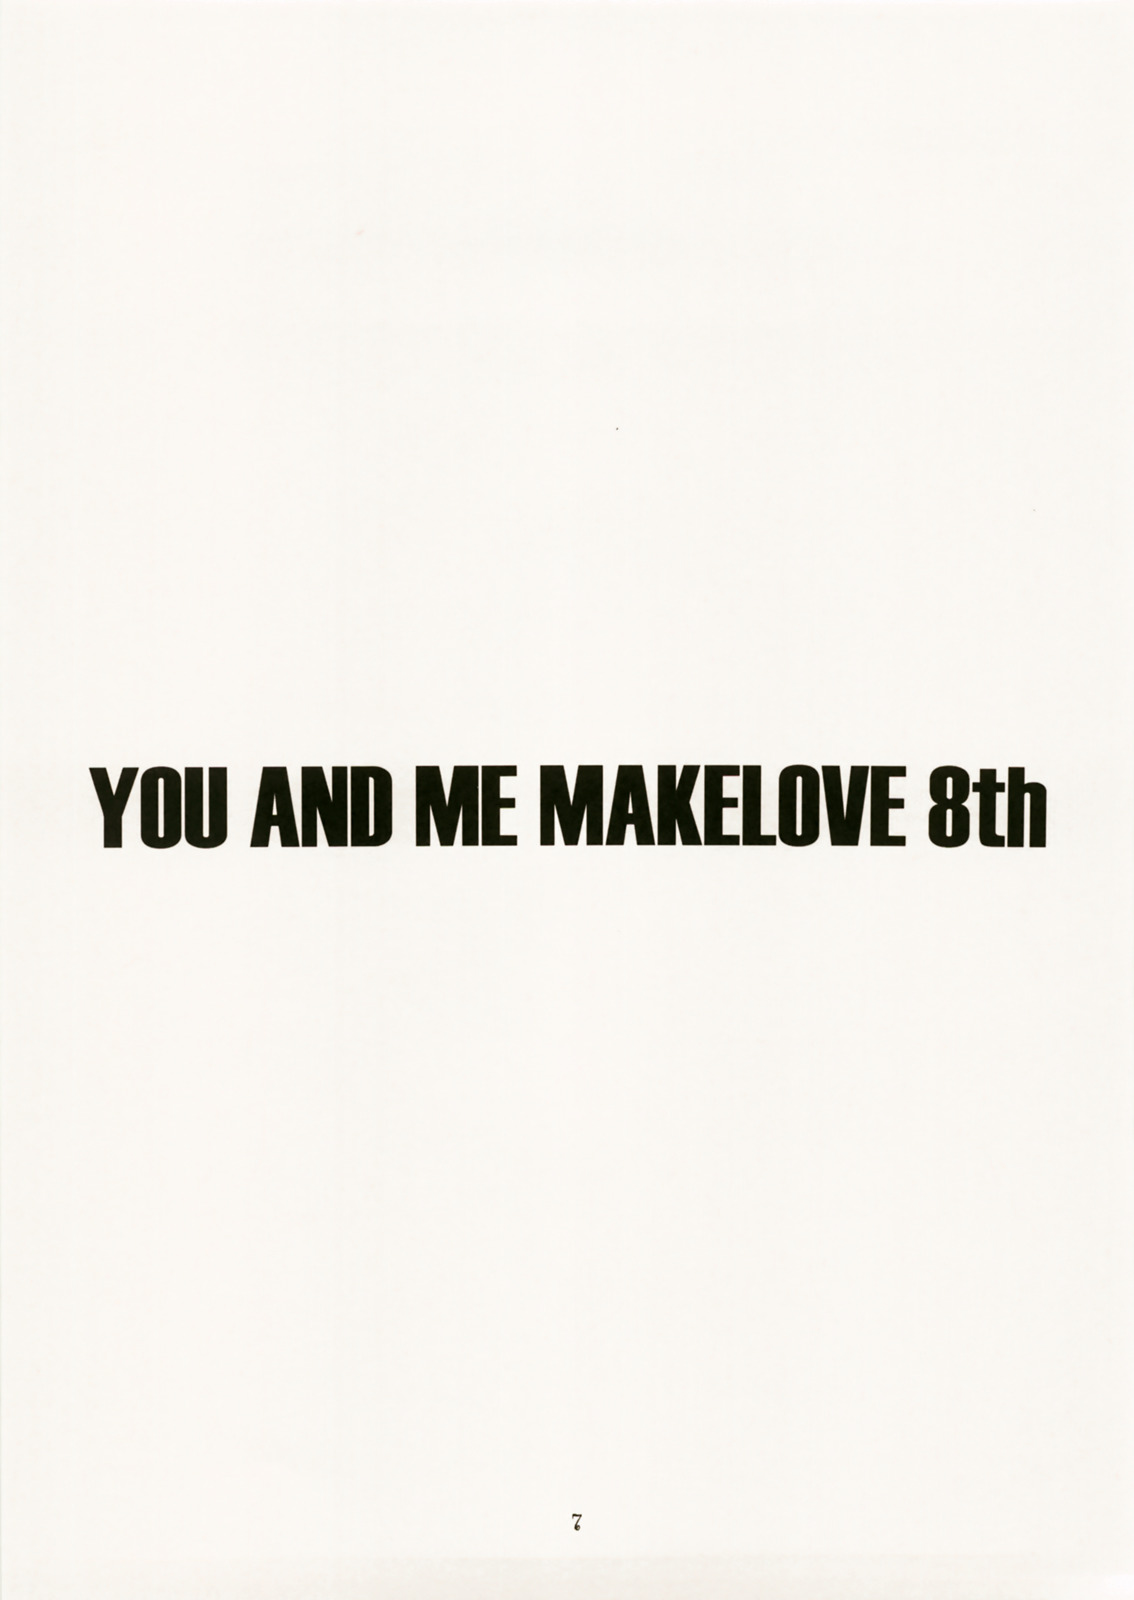 [PERFECT CRIME] YOU AND ME MAKELOVE 8th{masterbloodfer} 